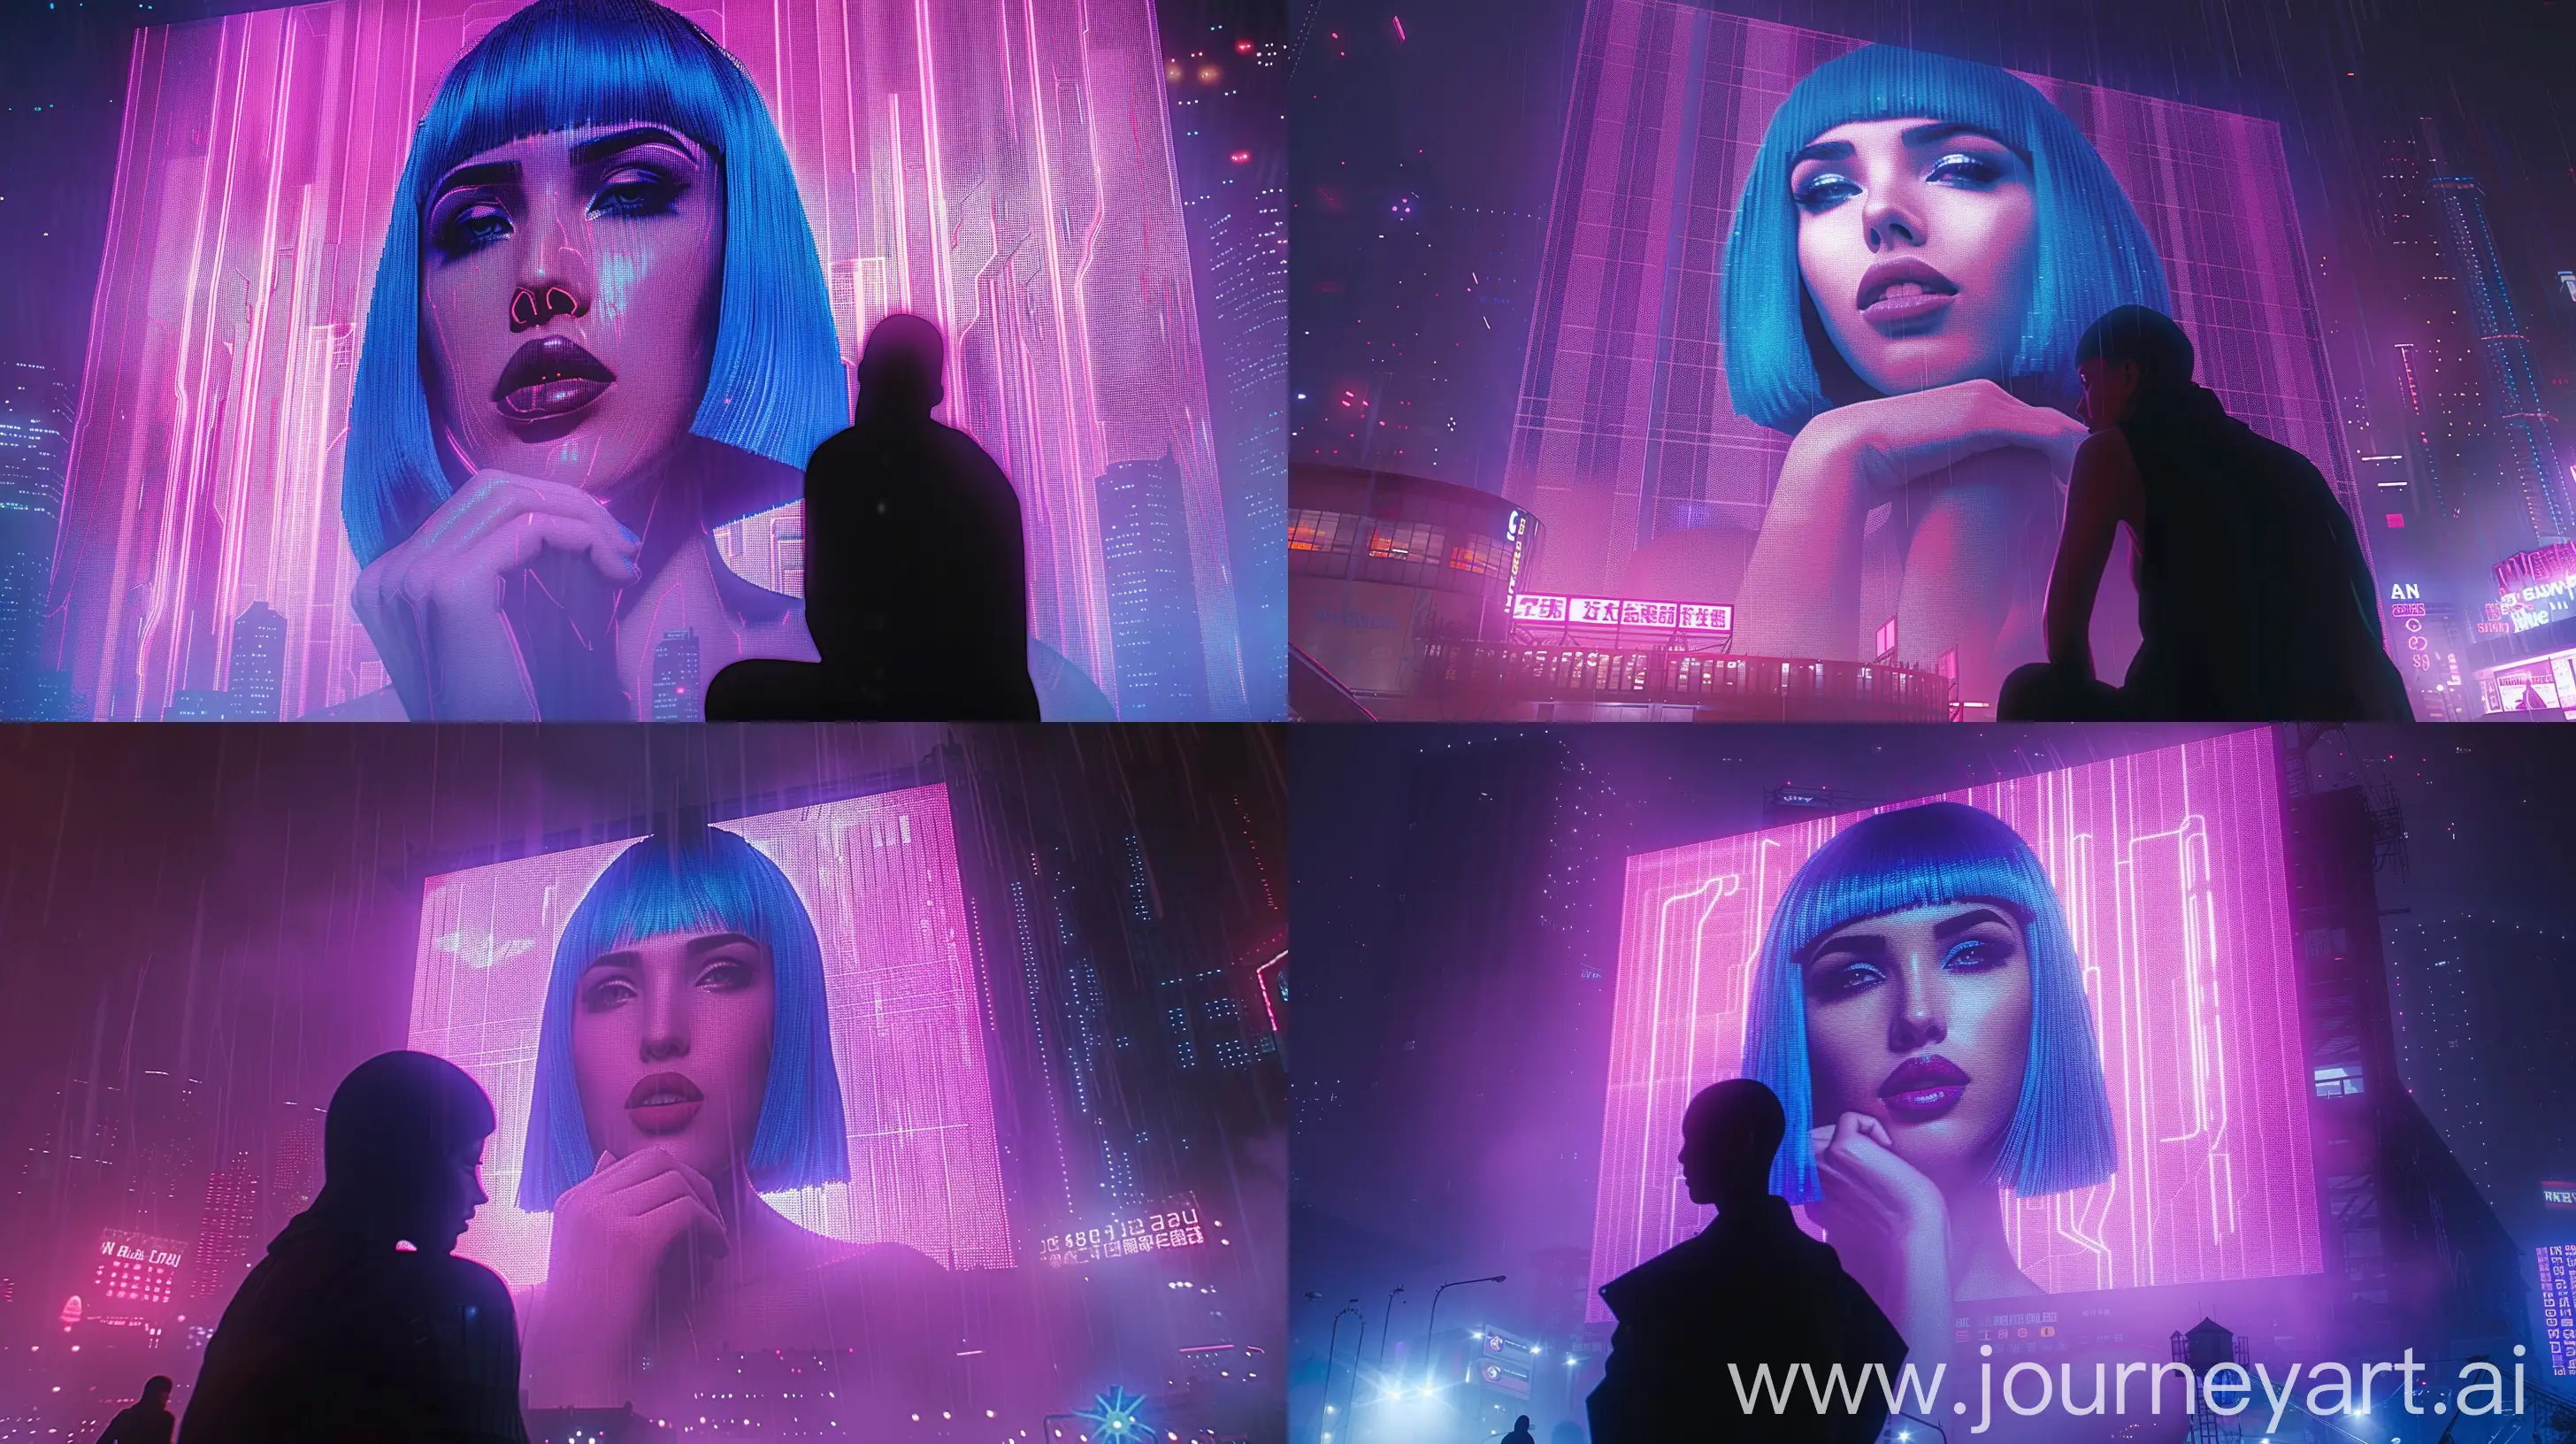 Futuristic cyberpunk cityscape at night, giant holographic advertisement of a woman with sleek blue bob hair and contemplative gaze, resting chin on hand, neon-noir purple and pink hues, silhouetted figure in foreground looking up, urban dystopian atmosphere, misty backdrop with scattered lights, high-definition pixelated textures, themes of isolation and technology's impact on humanity, no text, evocative mood --cref https://cdn.discordapp.com/attachments/1197716348361510973/1244525791967182978/Screenshot_20240525_232422.jpg?ex=66556e76&is=66541cf6&hm=db19443e59aee89a791e02e5af68bfea0534b9685e376a90bfc1abe86a128373& --ar 16:9 --s 600 --v 6